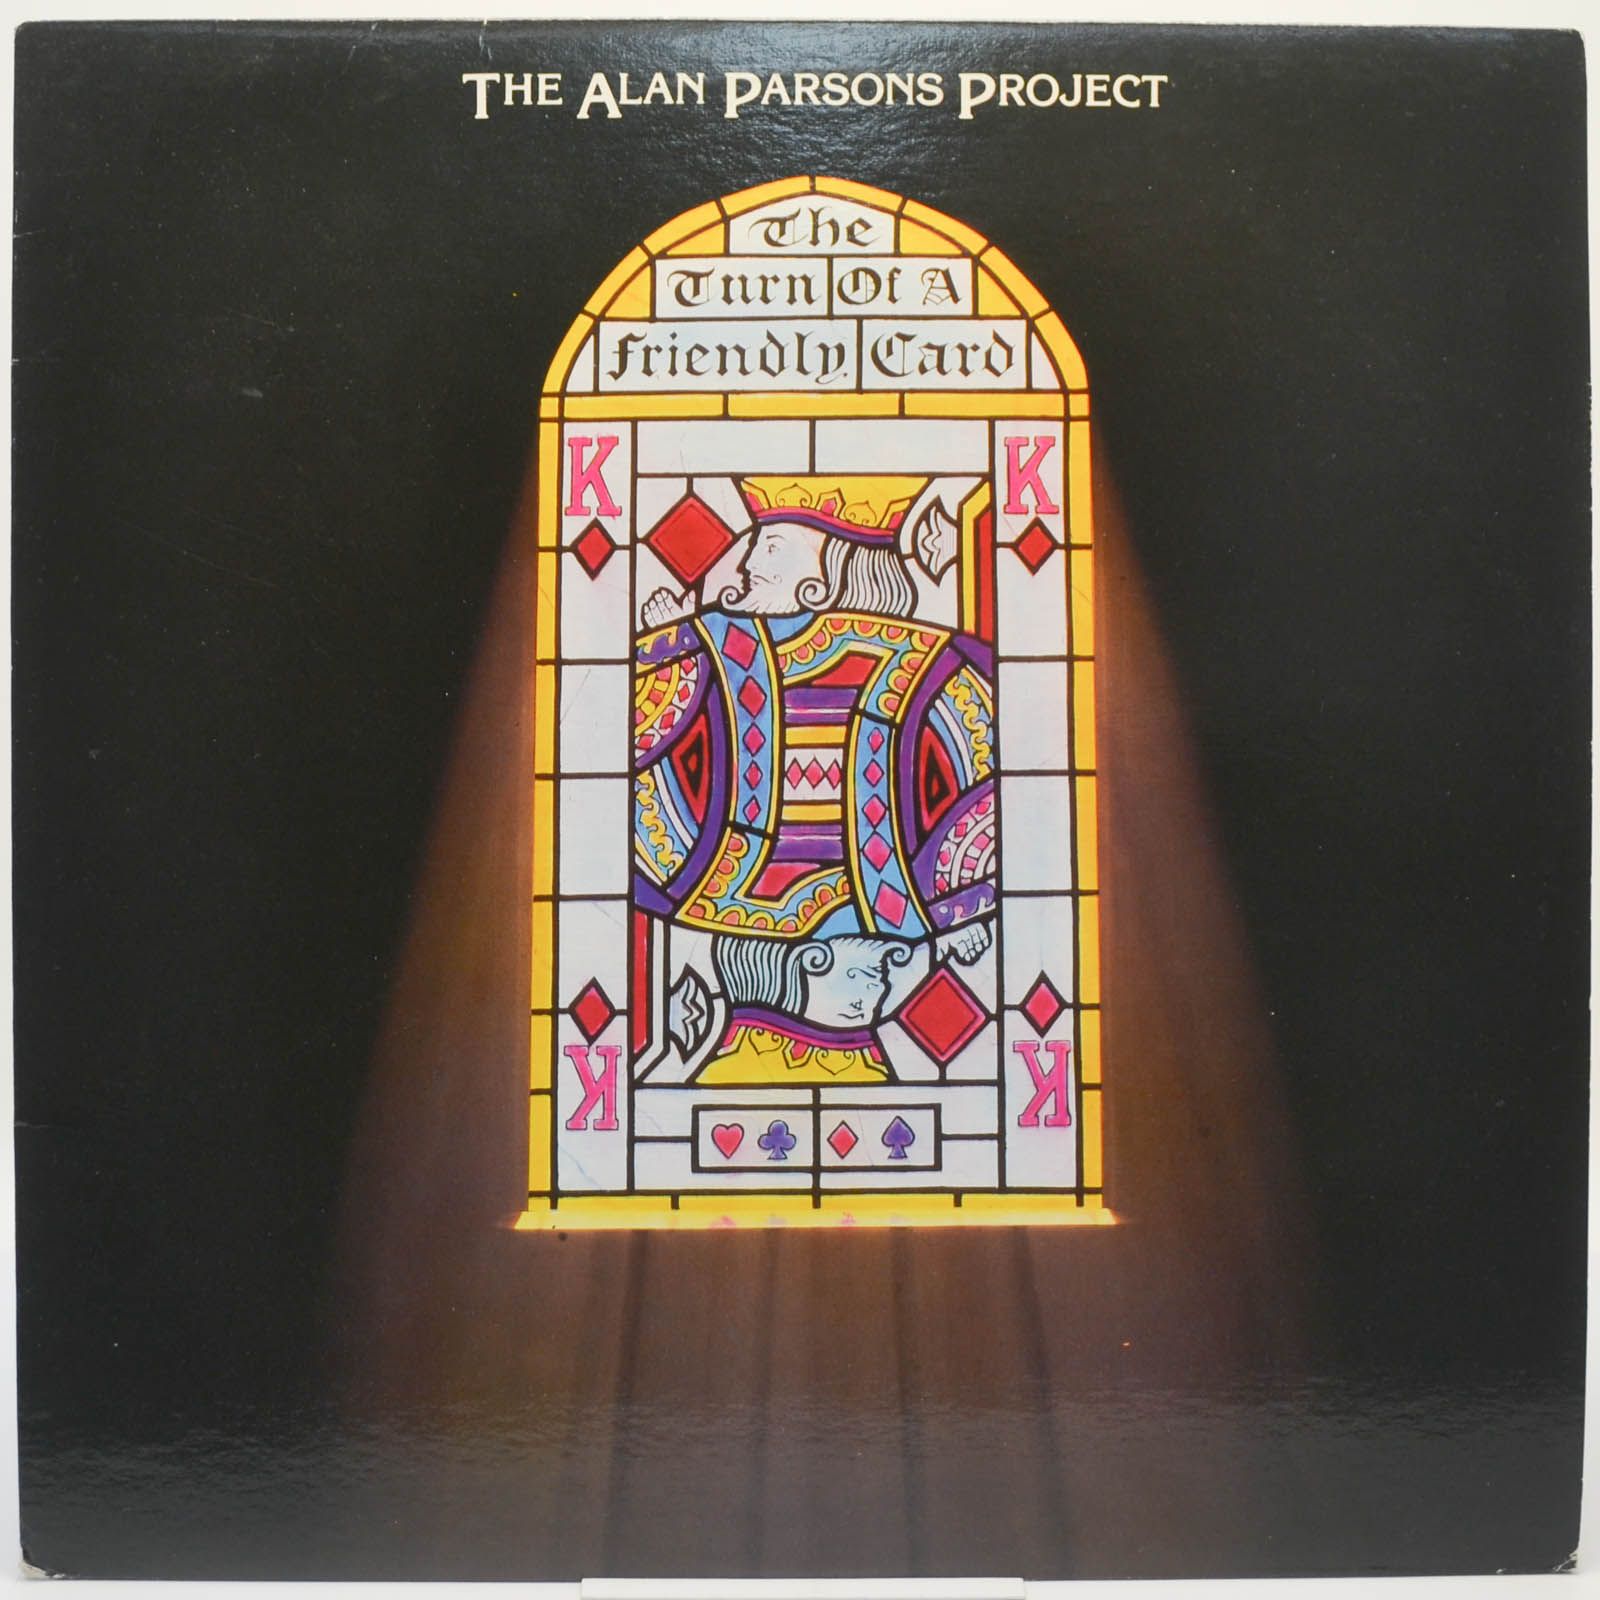 Alan Parsons Project — The Turn Of A Friendly Card, 1980